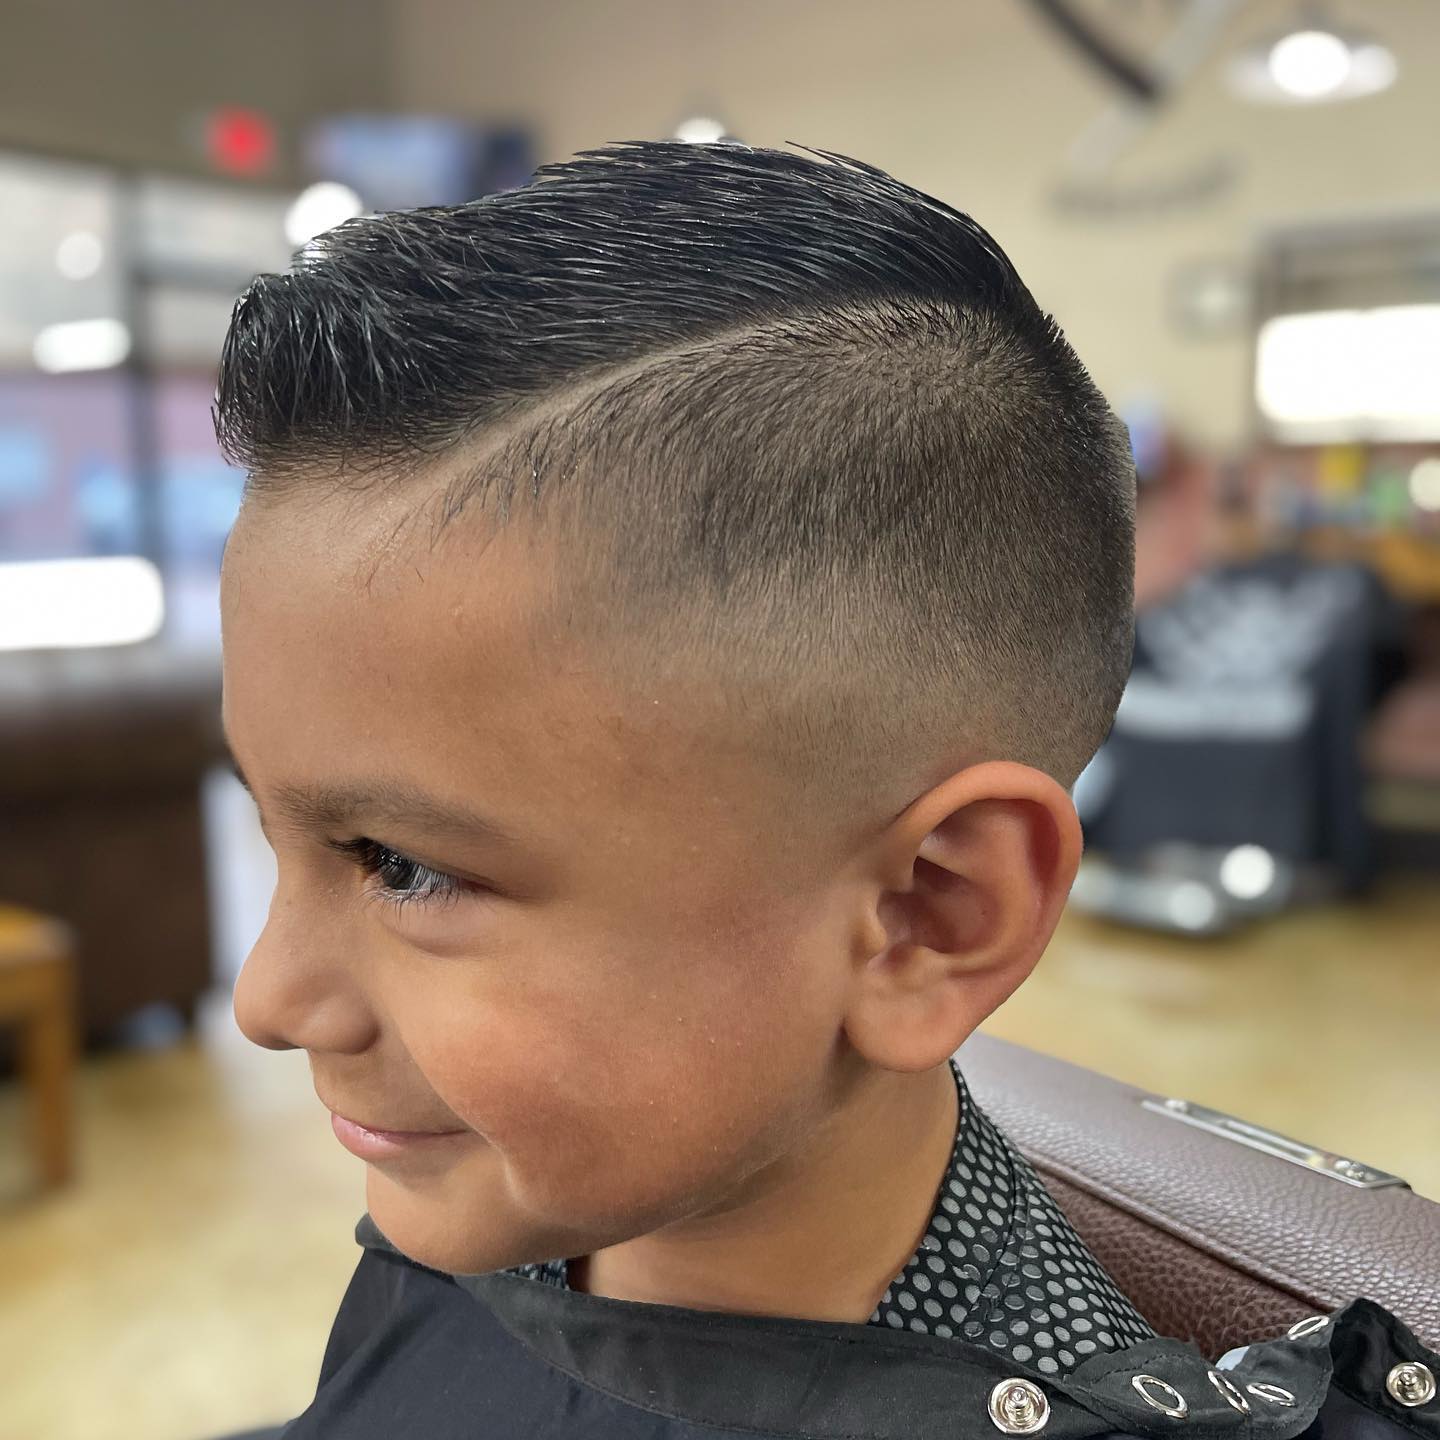 Cut and shave barbershop 15903 Hwy 6 suite C, Rosharon Texas 77583